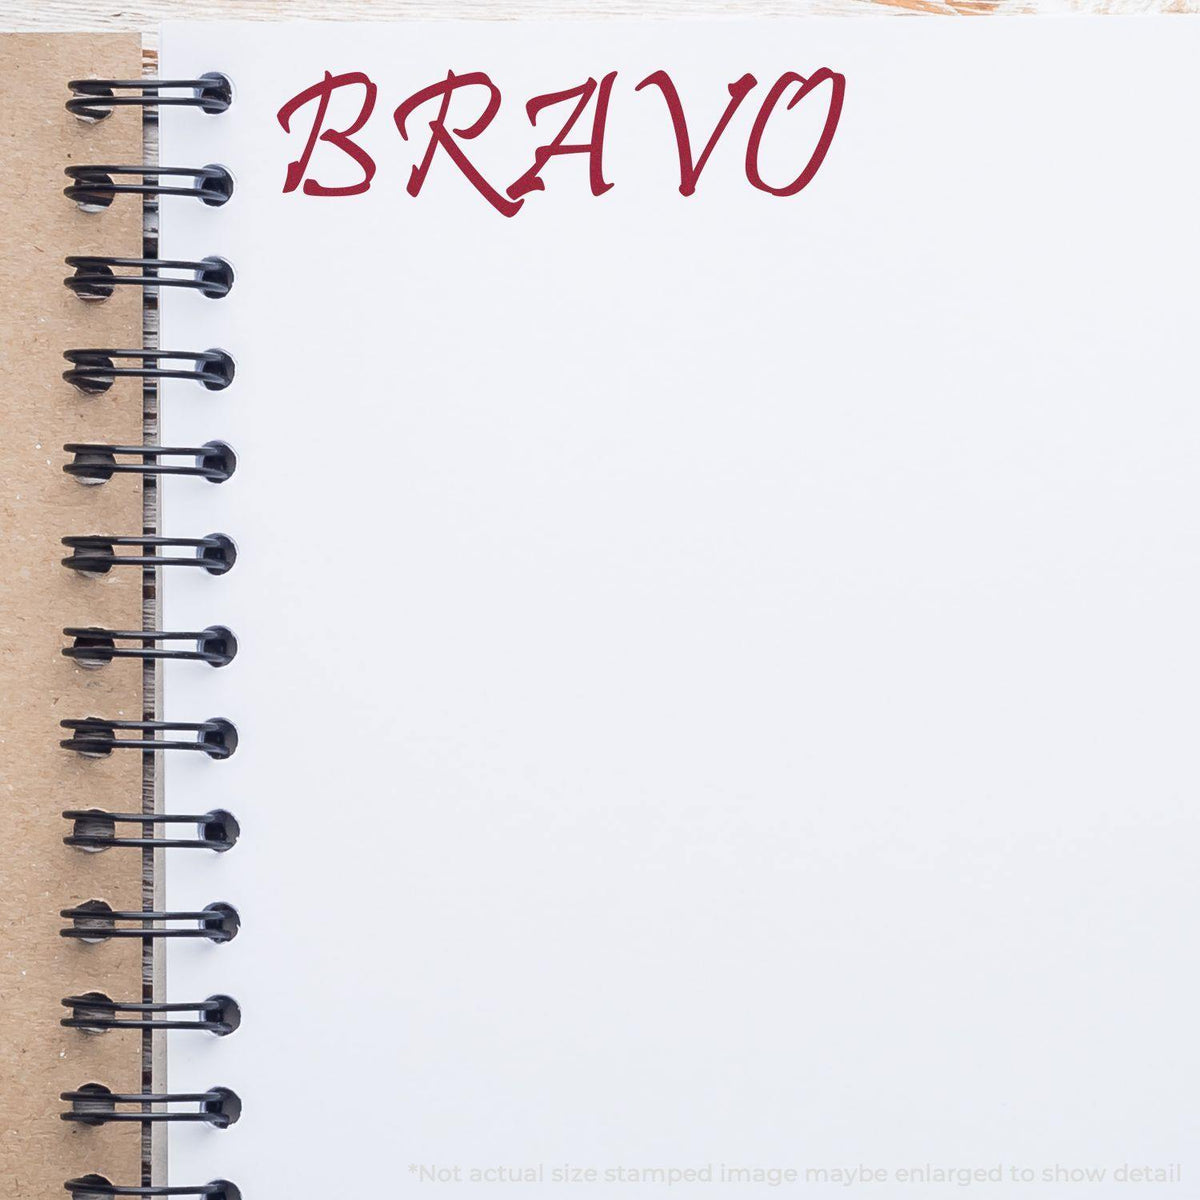 Large Bravo Rubber Stamp In Use Photo